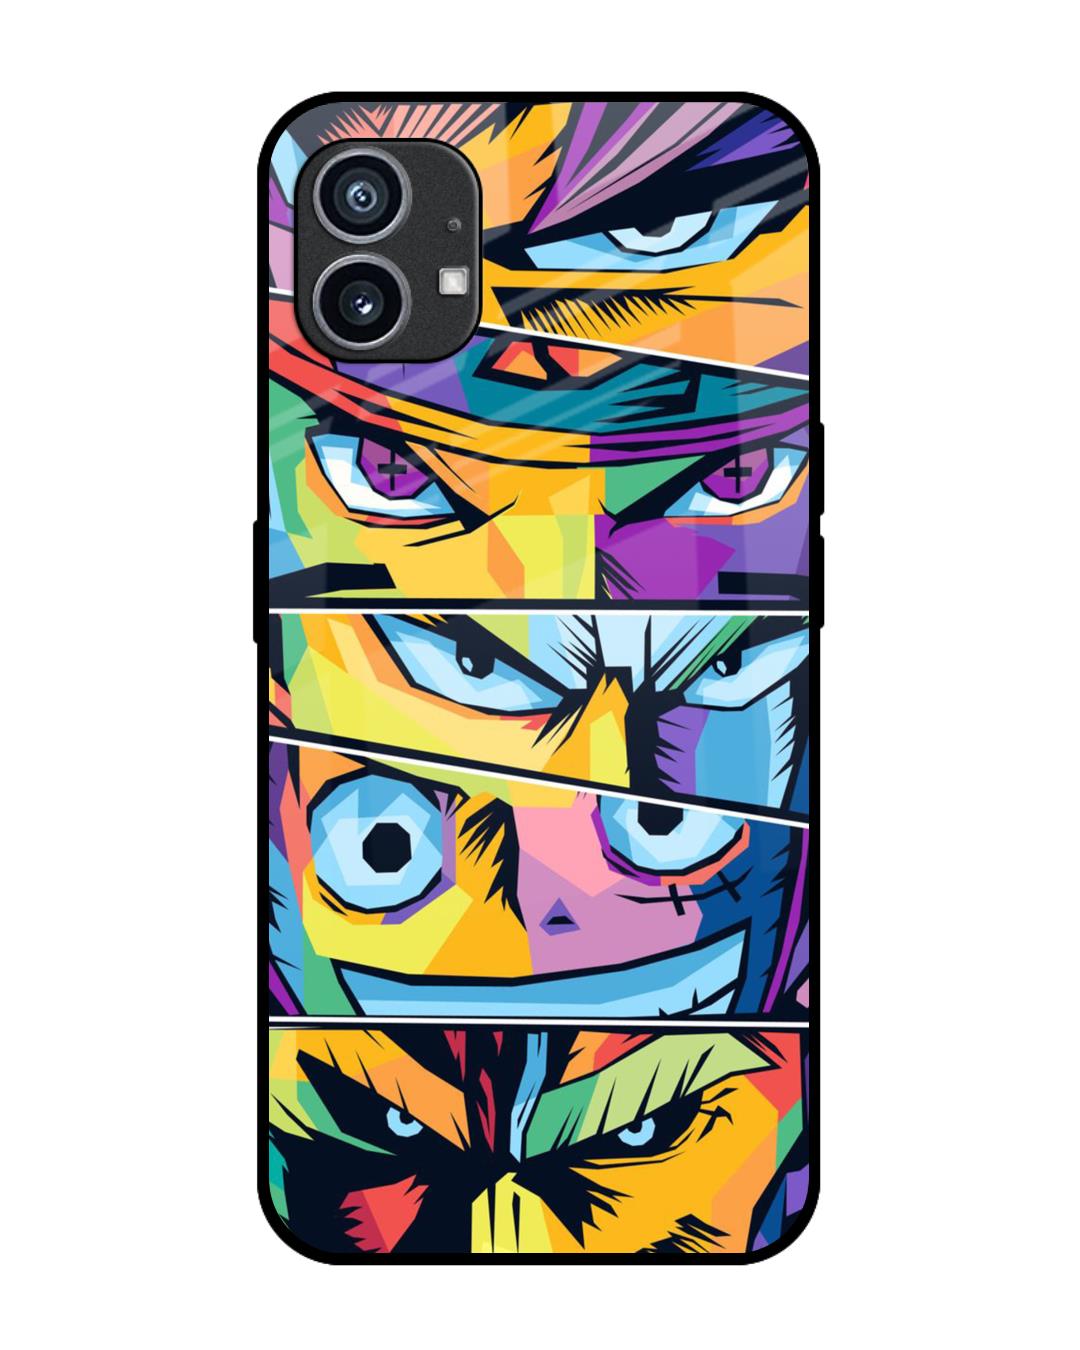 Naruto Monochrome Back Case for Galaxy M32  Mobile Phone Covers  Cases in  India Online at CoversCartcom